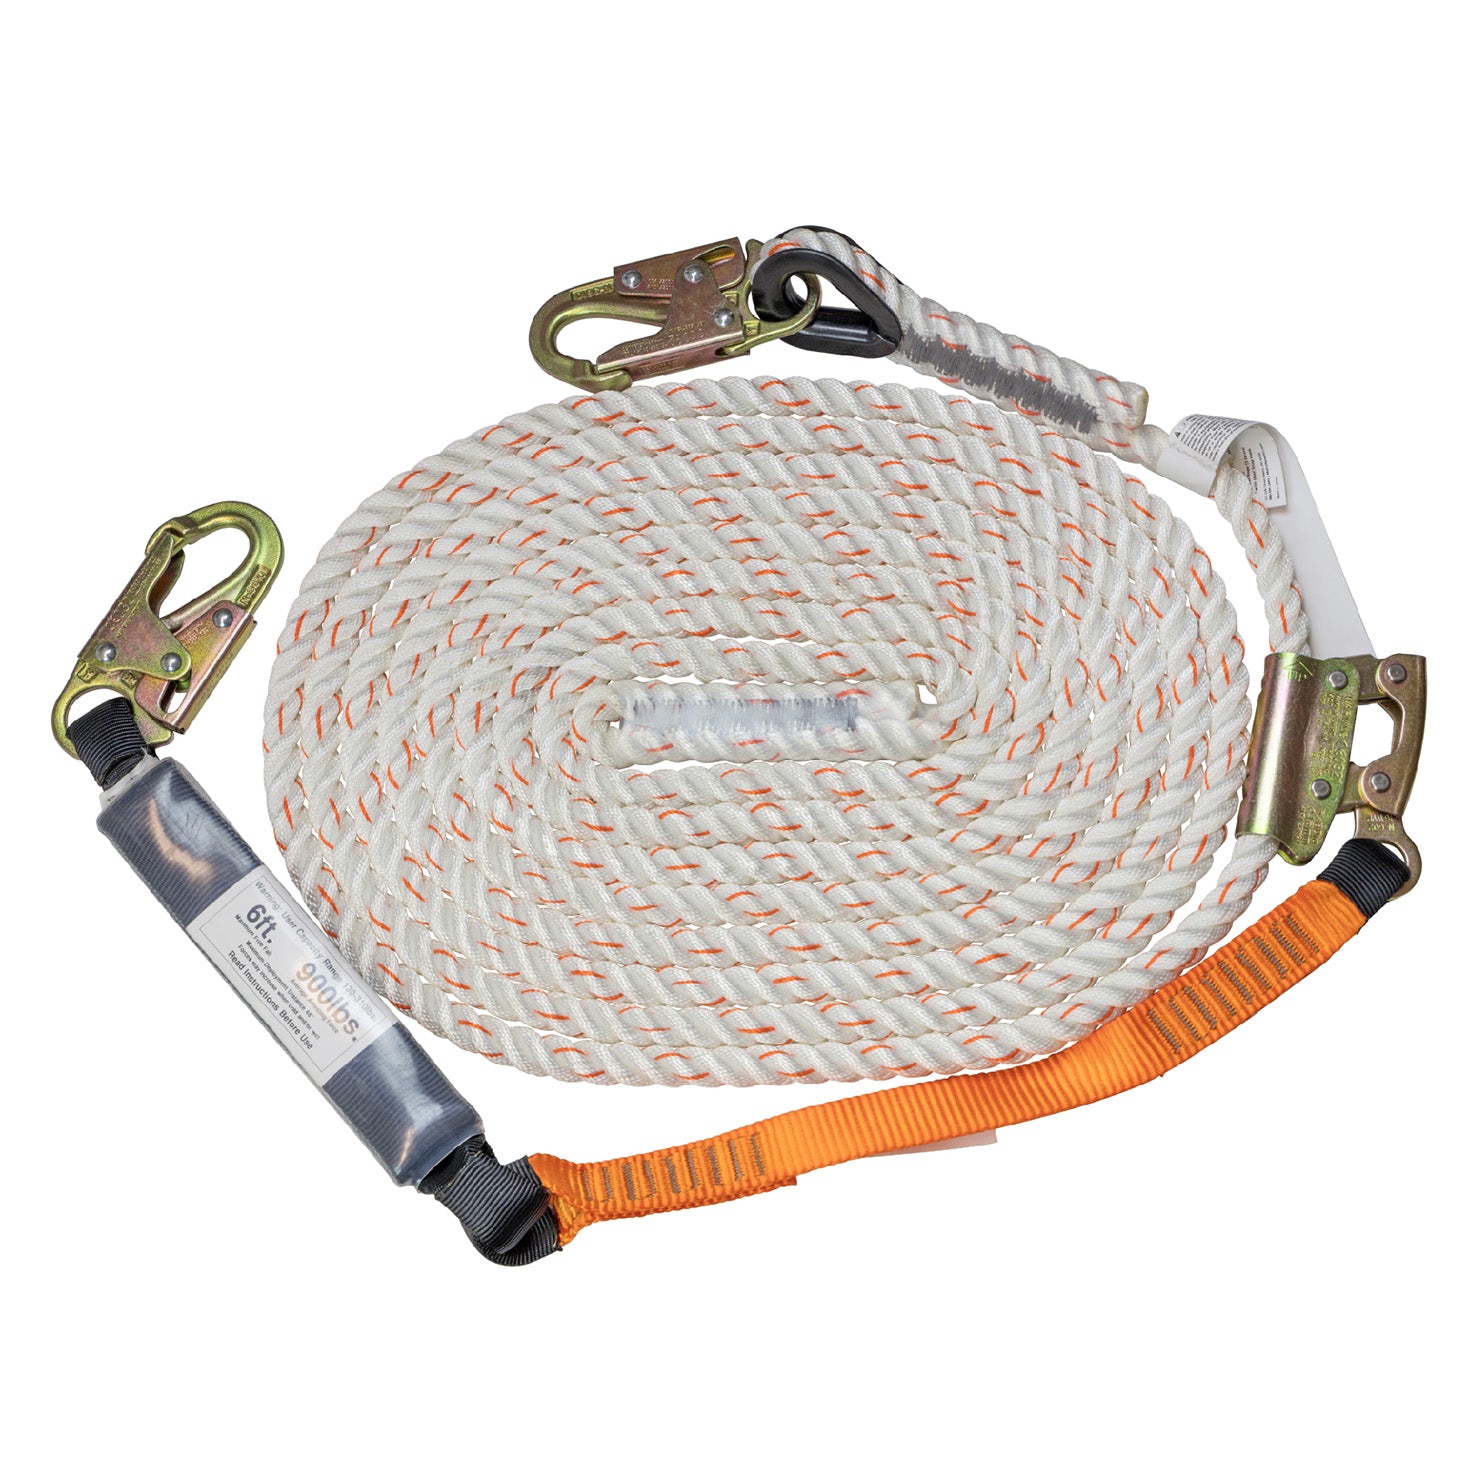 Malta C7050 Vertical Lifeline Assembly with 6' Lanyard & 50' Rope